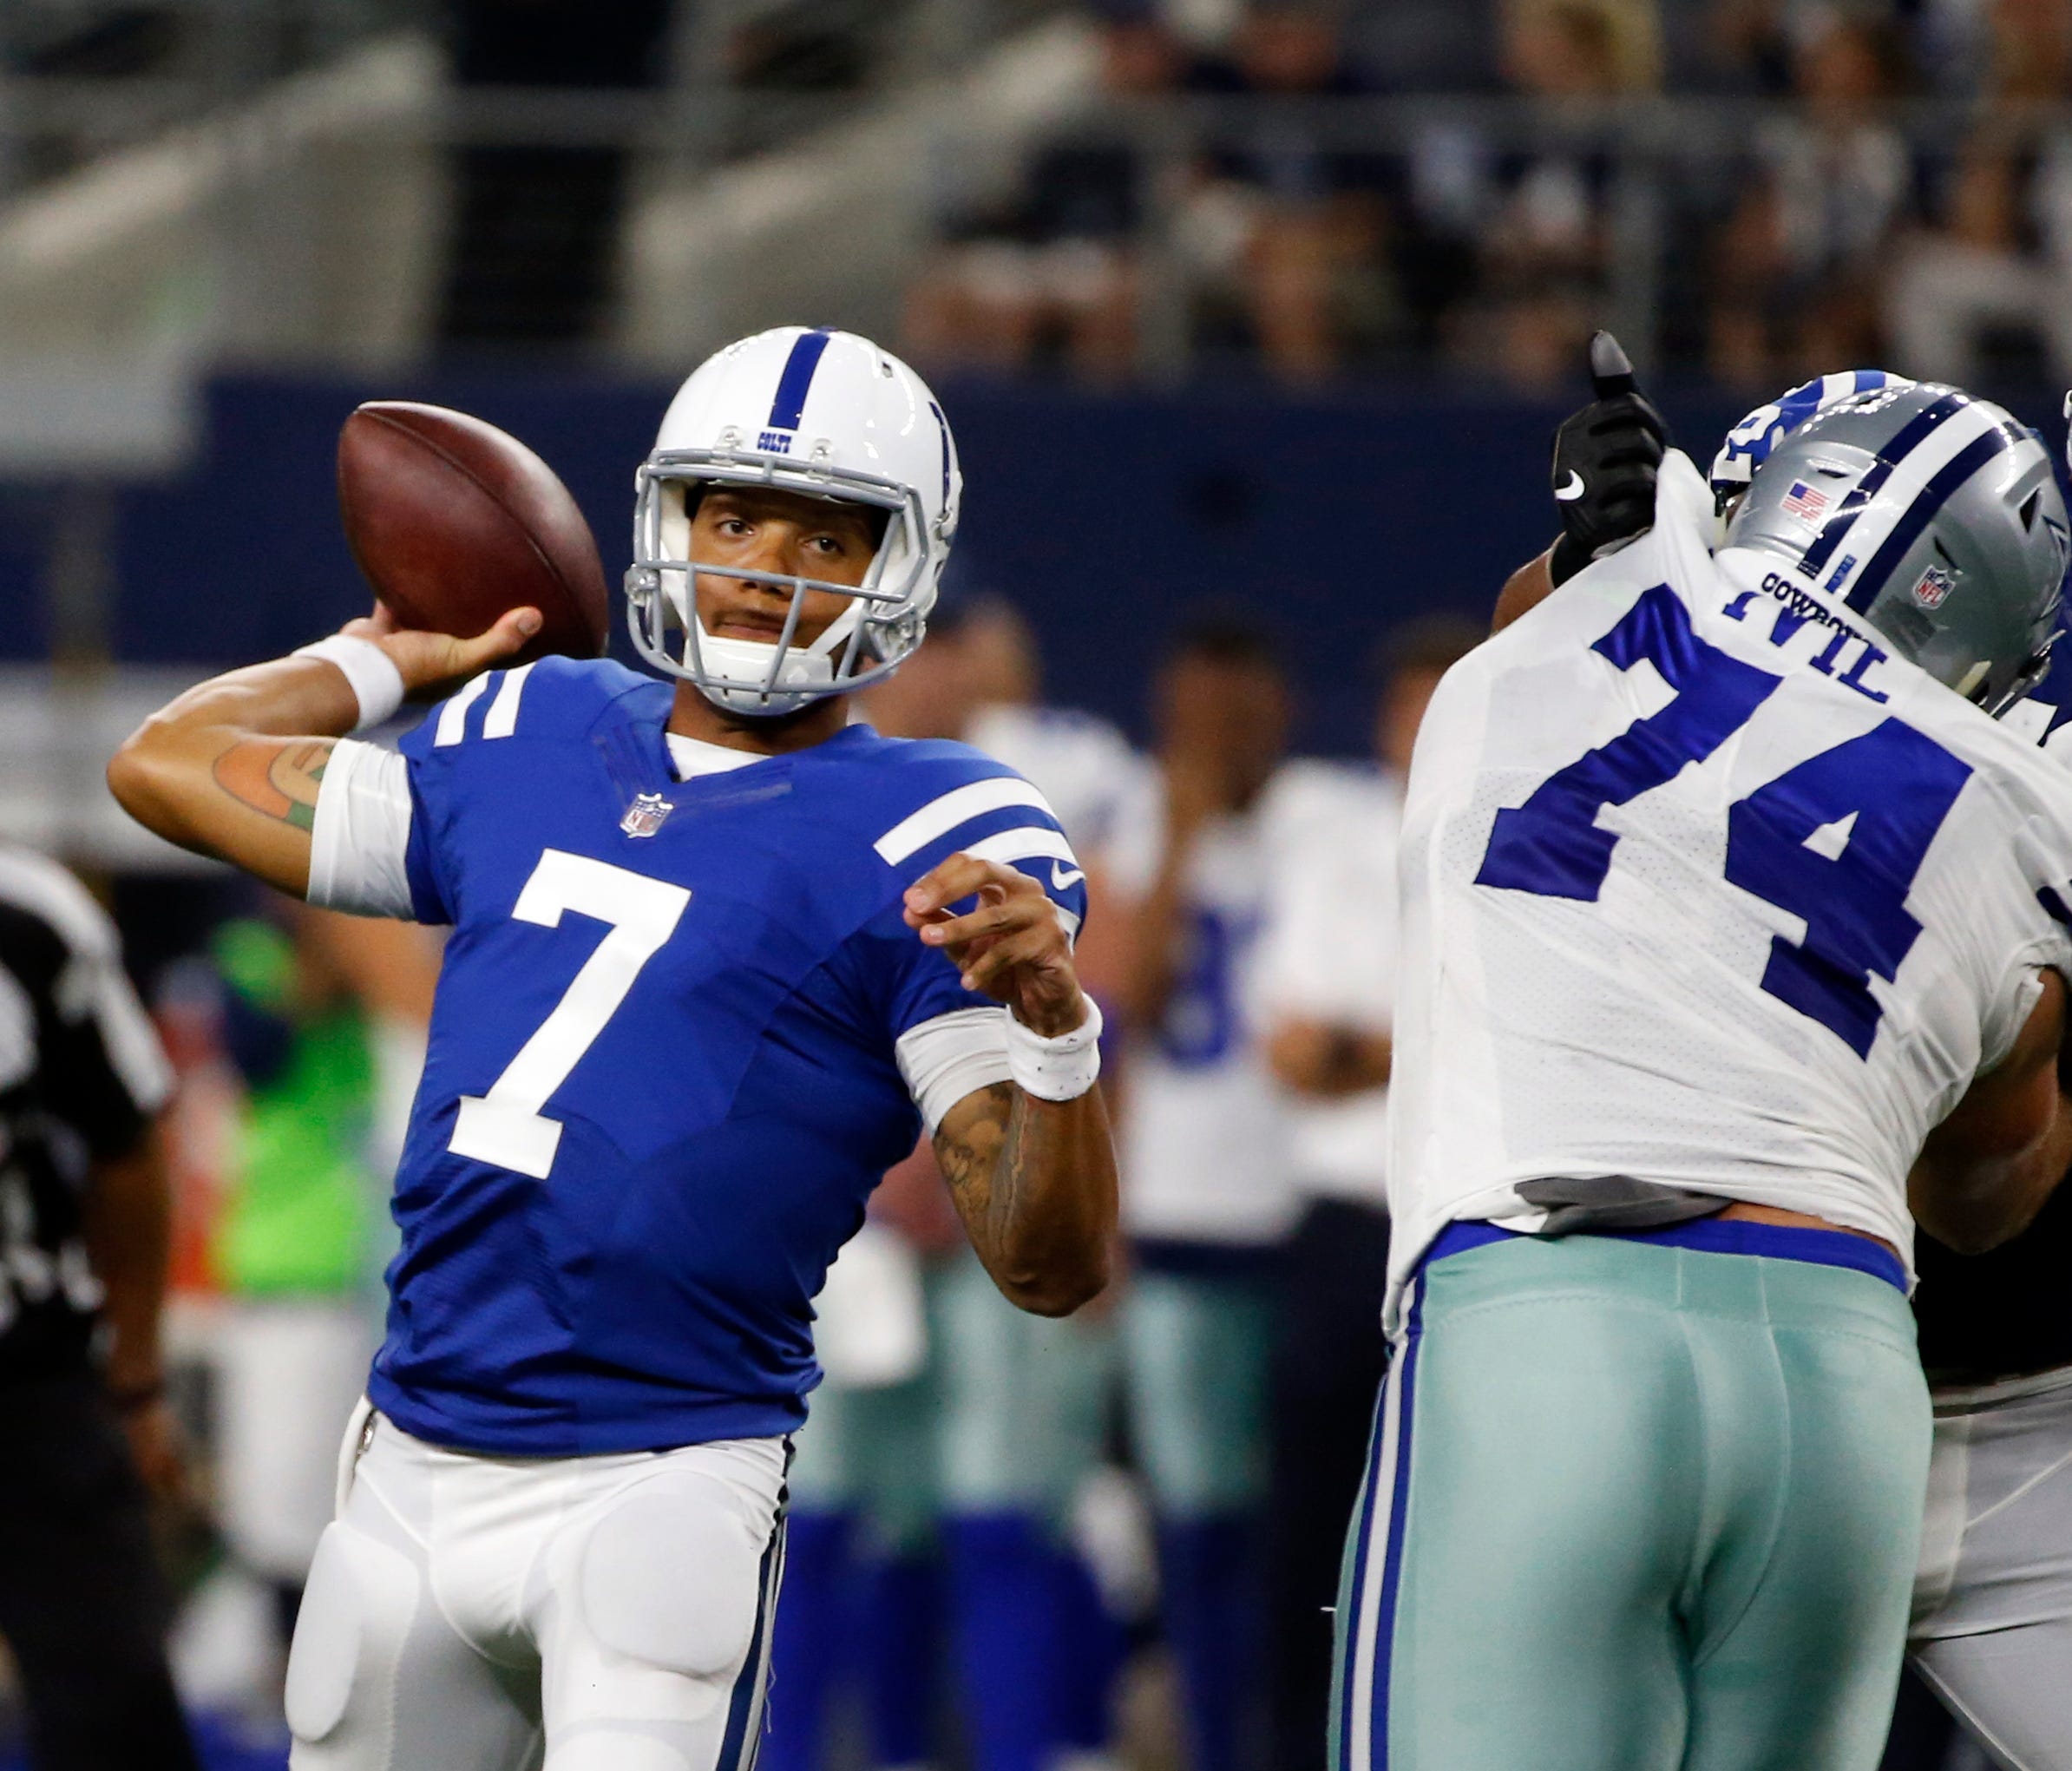 Indianapolis Colts quarterback Stephen Morris (7) throws a pass under pressure from Dallas Cowboys defensive tackle Joey Ivie (74) during the second half of a preseason NFL football game, Saturday, Aug. 19, 2017, in Arlington, Texas. (AP Photo/Michae